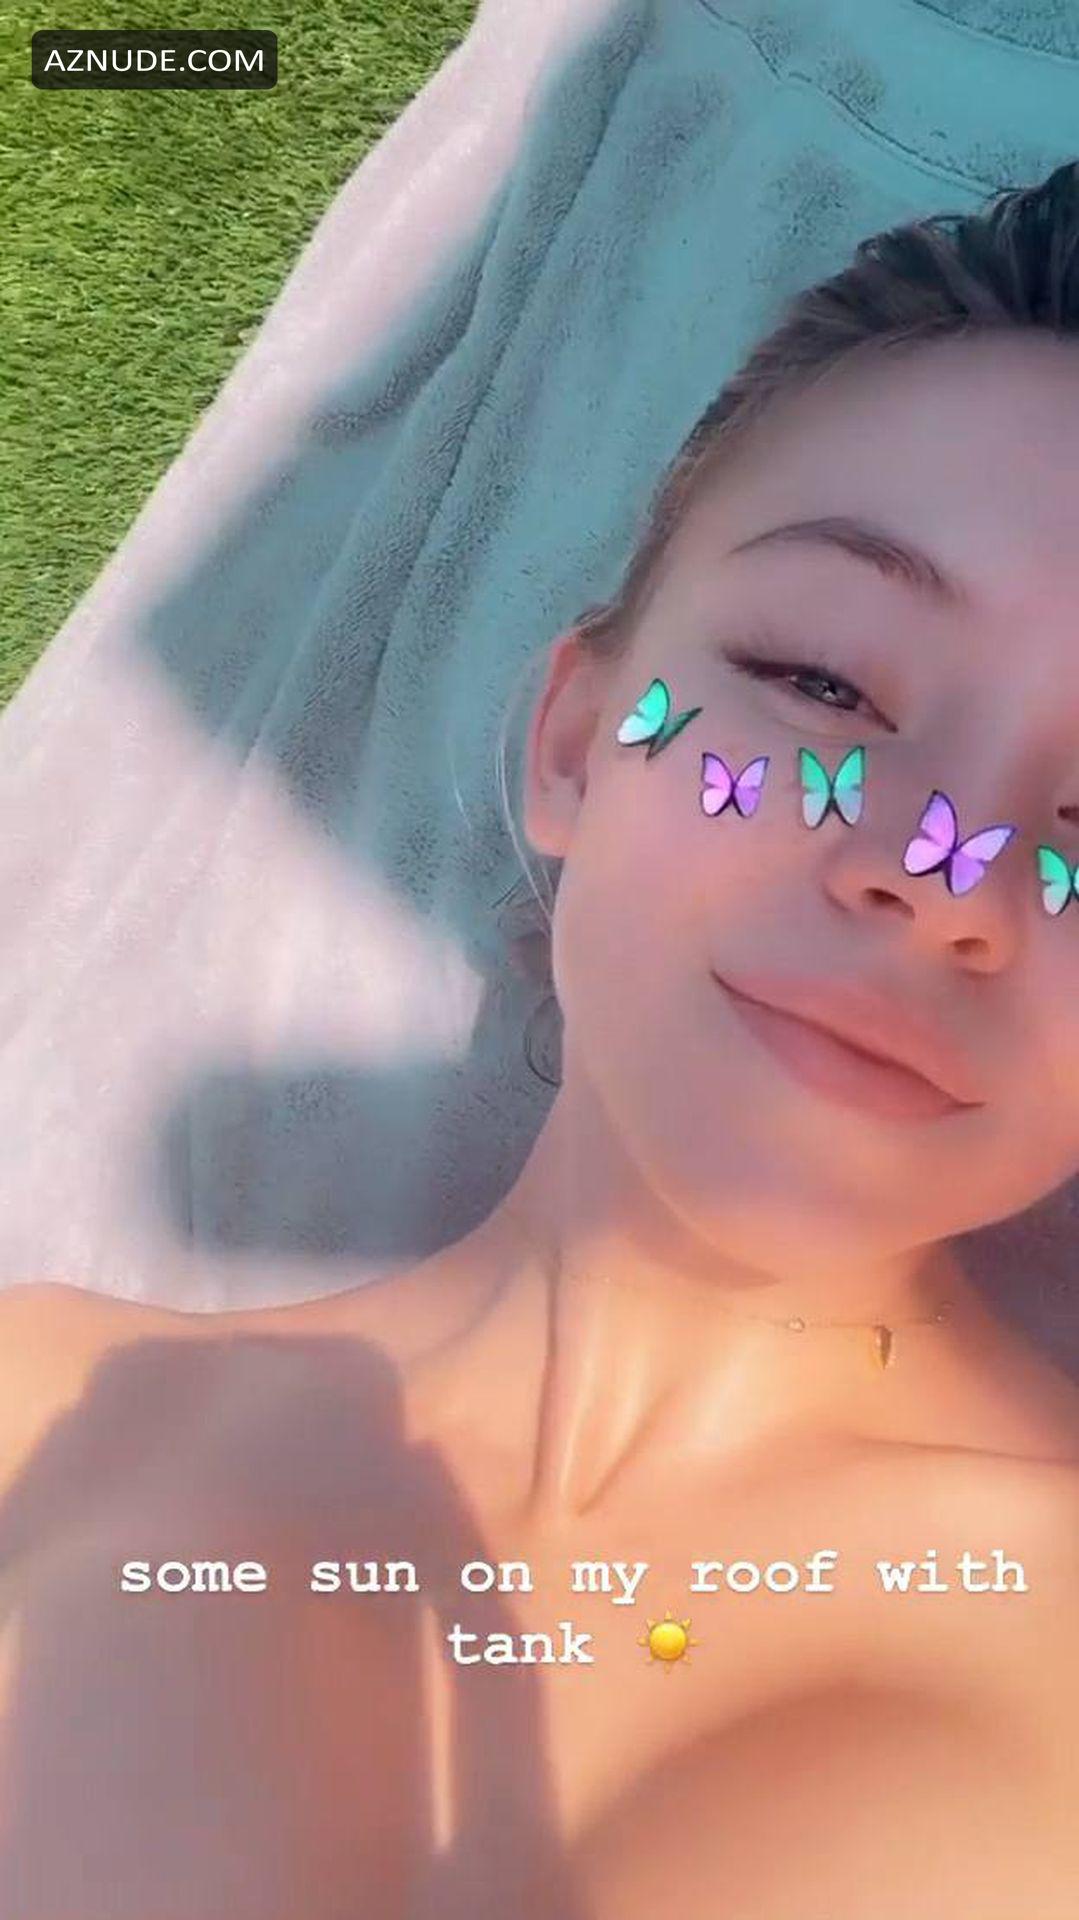 Sydney Sweeney Looks Hot Showing Off Her Tits While Sunbathing Topless